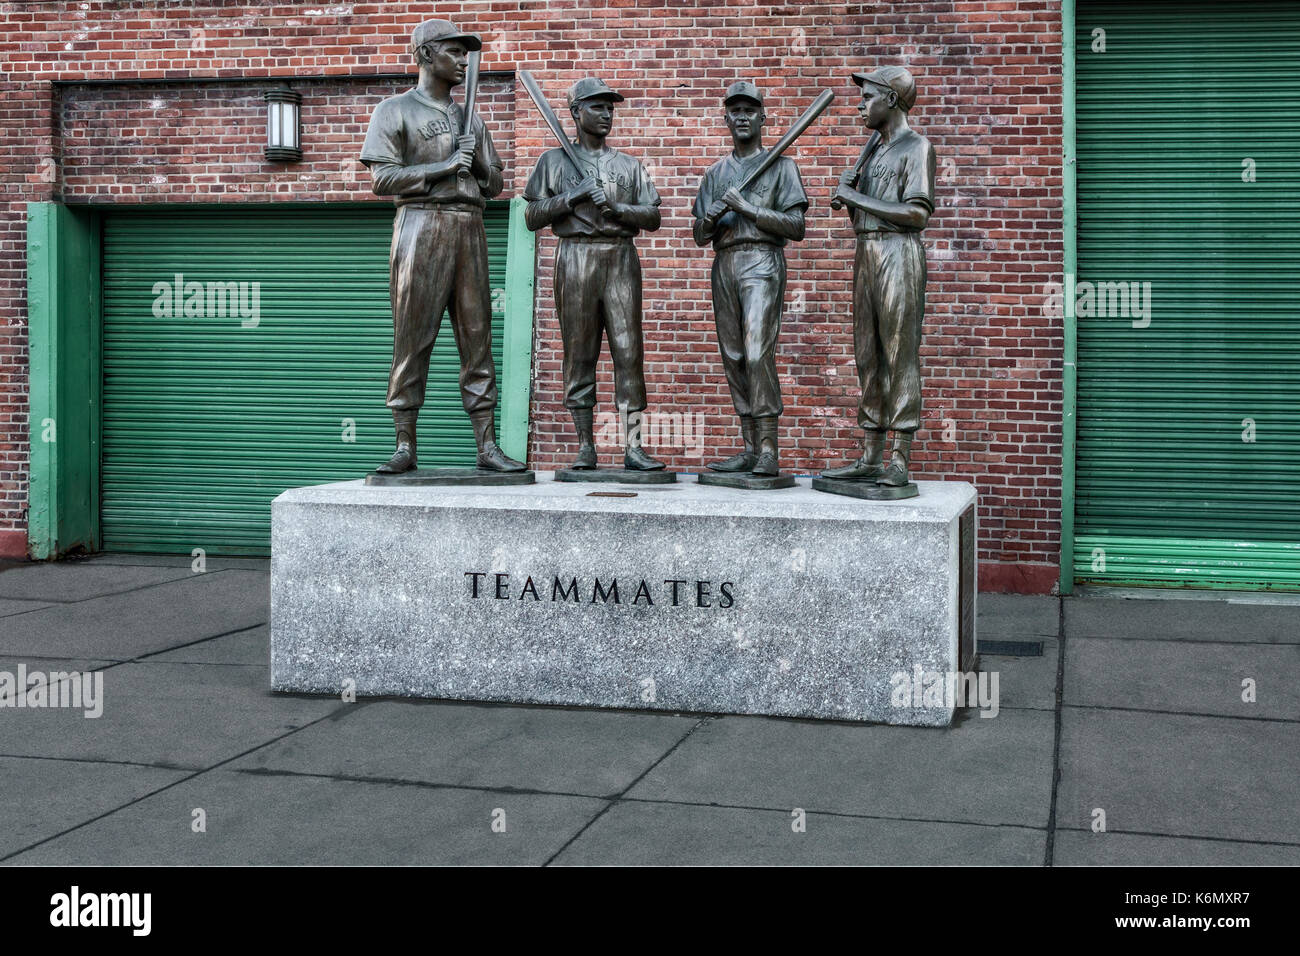 Boston Red Sox Teammates -  Bronze statue of 'The Teammates'  Red Sox players and decades-long friendship of four legends Ted Williams, Johnny Pesky, Bobby Doerr and Dom DiMaggio.   The statue of the four teammates stands outside of Gate B at Fenway Park at the intersection of Ipswich and Van Ness streets.  Available in color as well as in a black and white print.  To view additional images from my Fenway Park gallery please visit: www.susancandelario.com Stock Photo